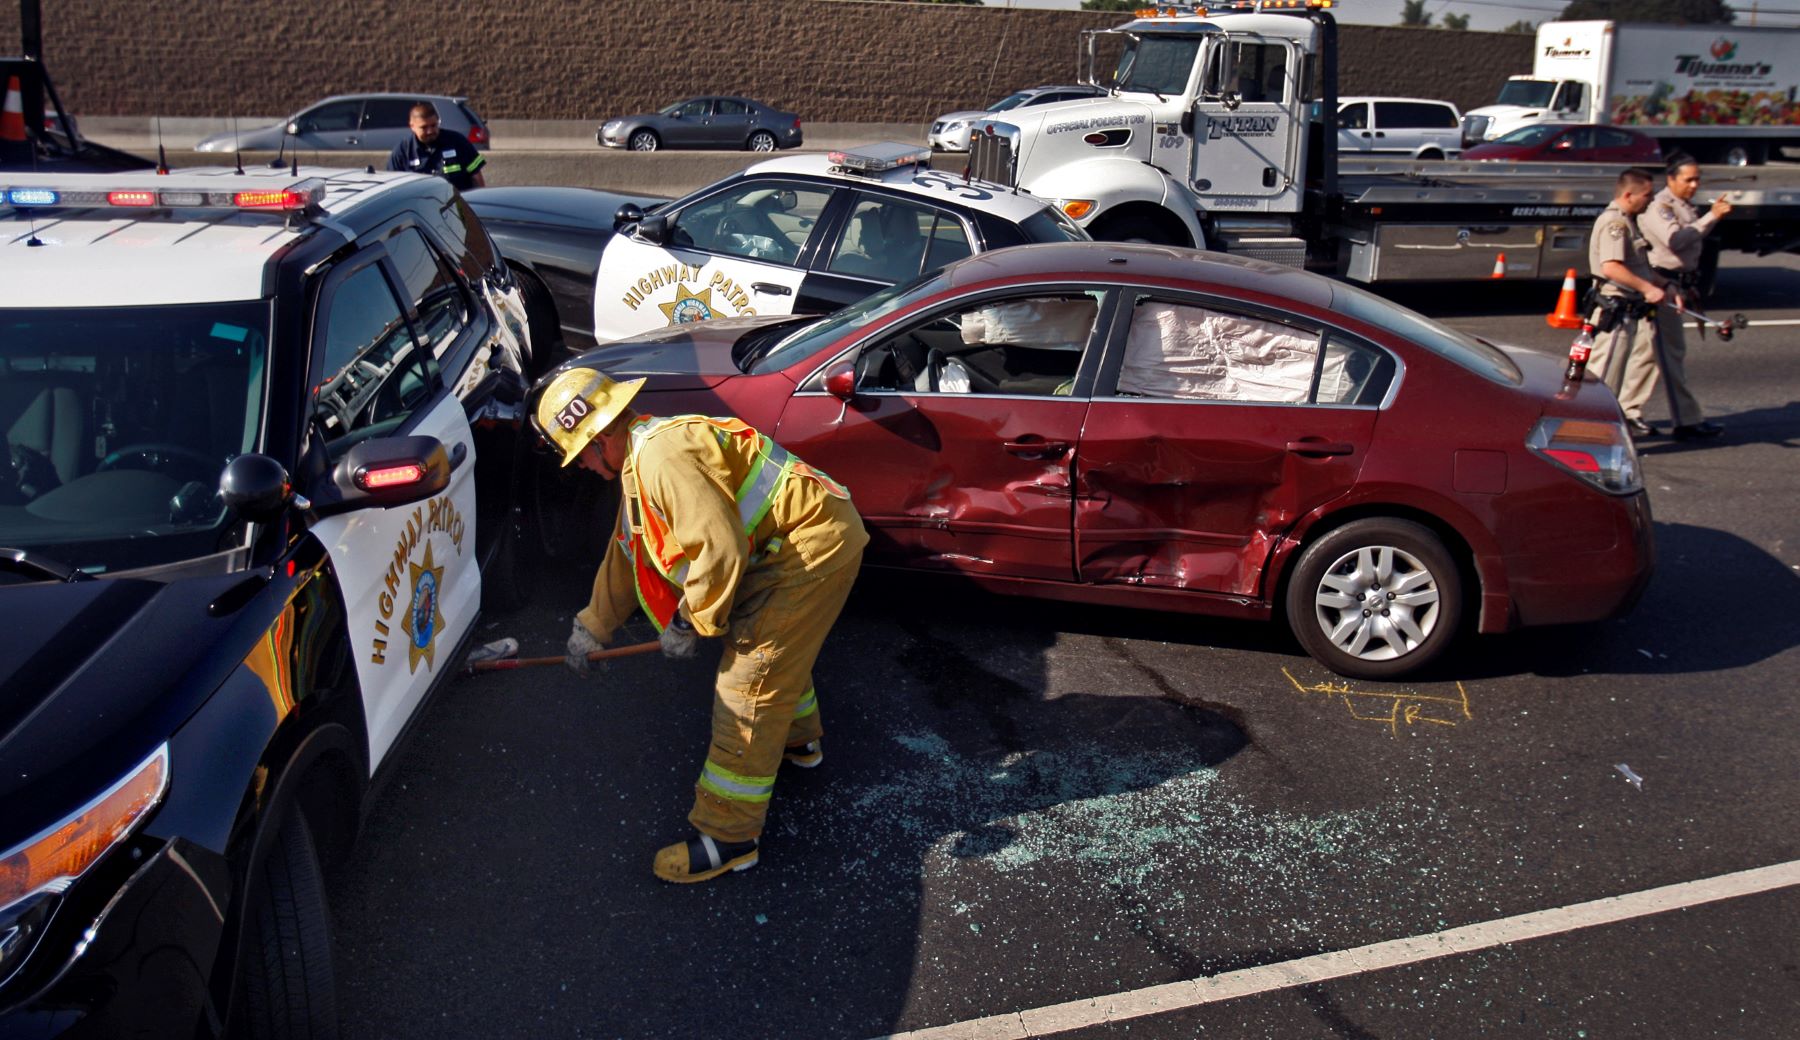 A PIT Maneuver accident aftermath with Los Angeles County firefighter and paramedic teams and California Highway Aptrol officers on-site